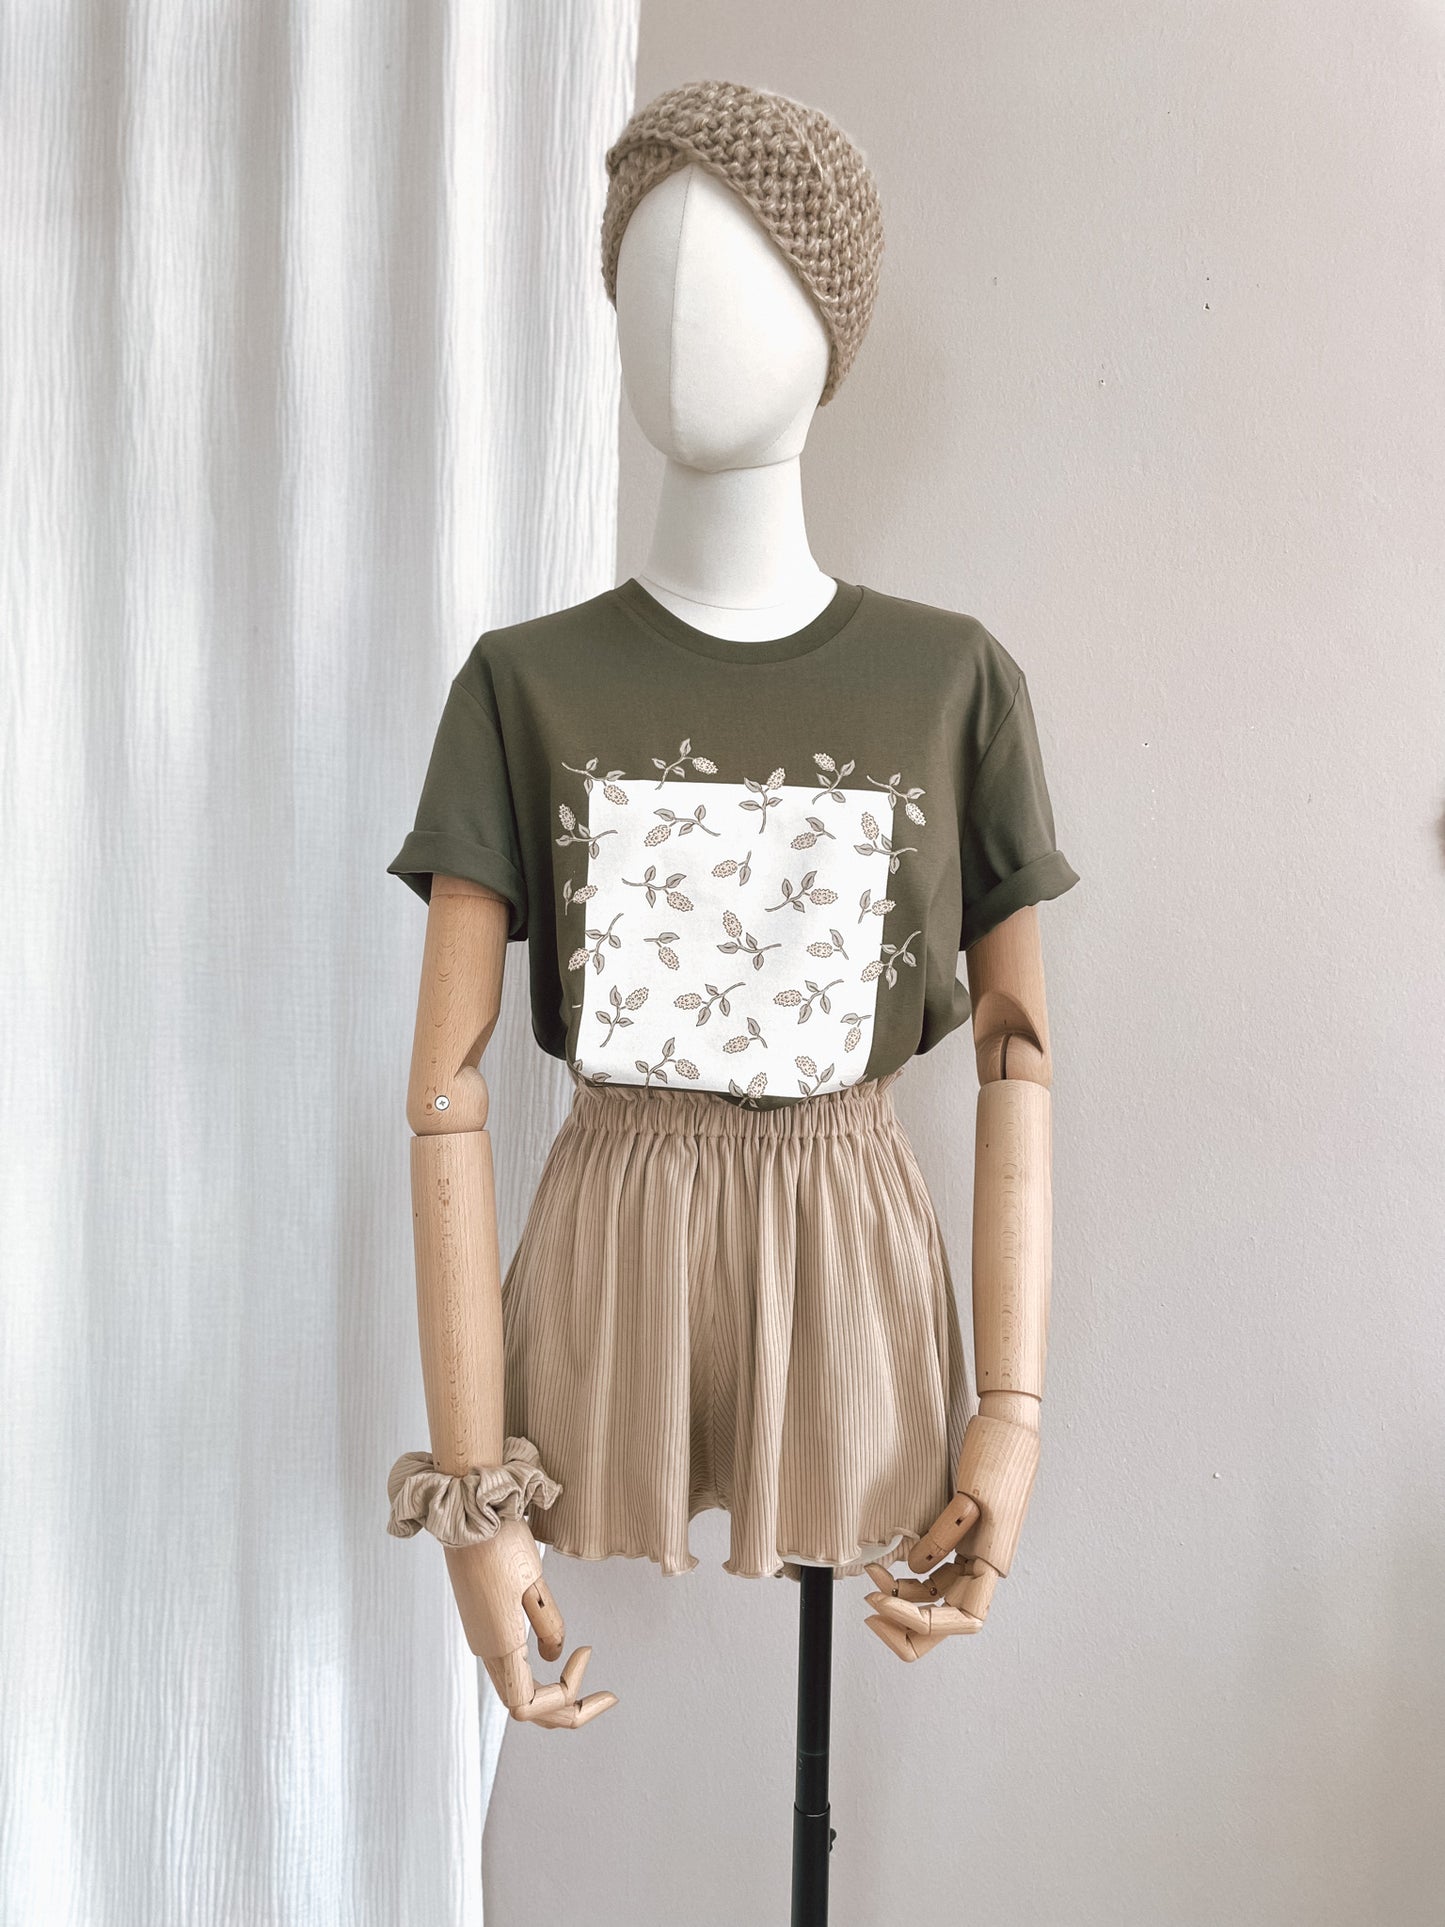 T-shirt / Simple floral / rosemary